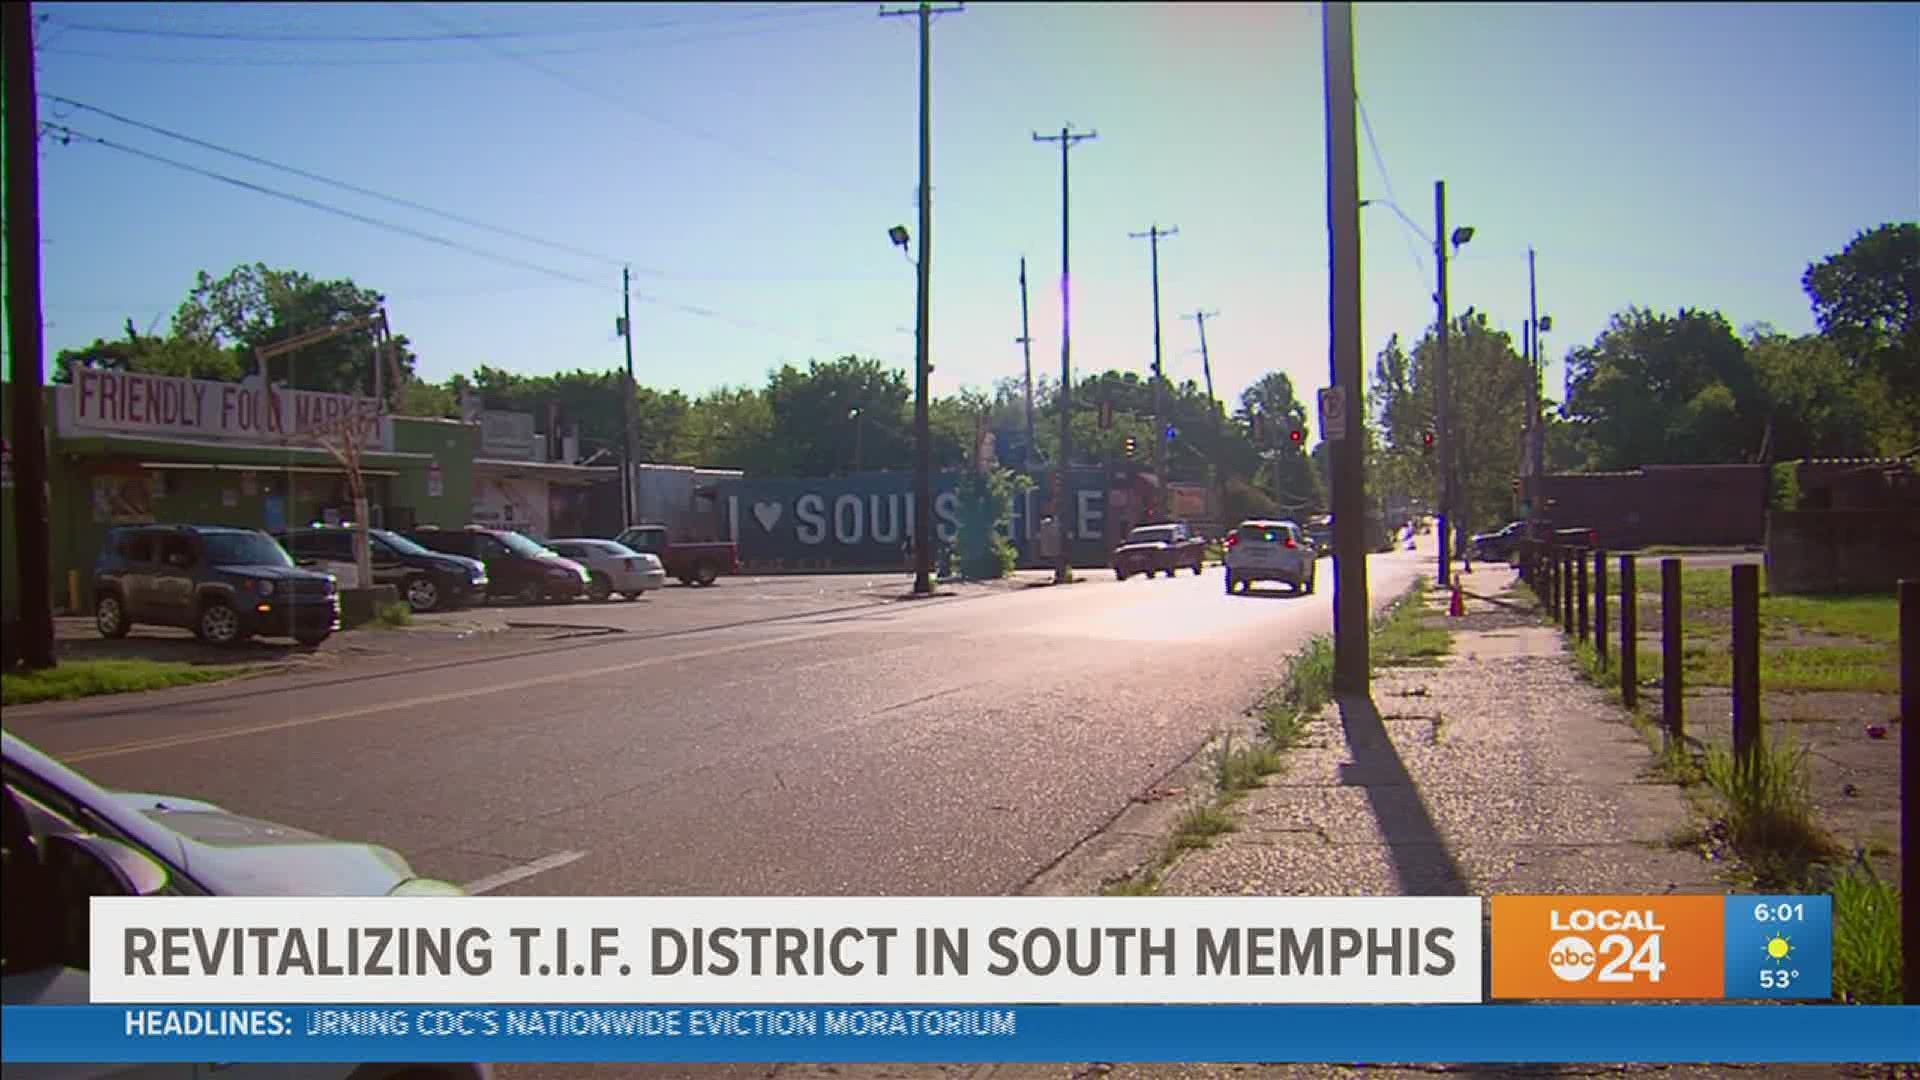 The SoulsvilleUSA Neighborhoods Development District is proposing a TIF district in parts of South Memphis.